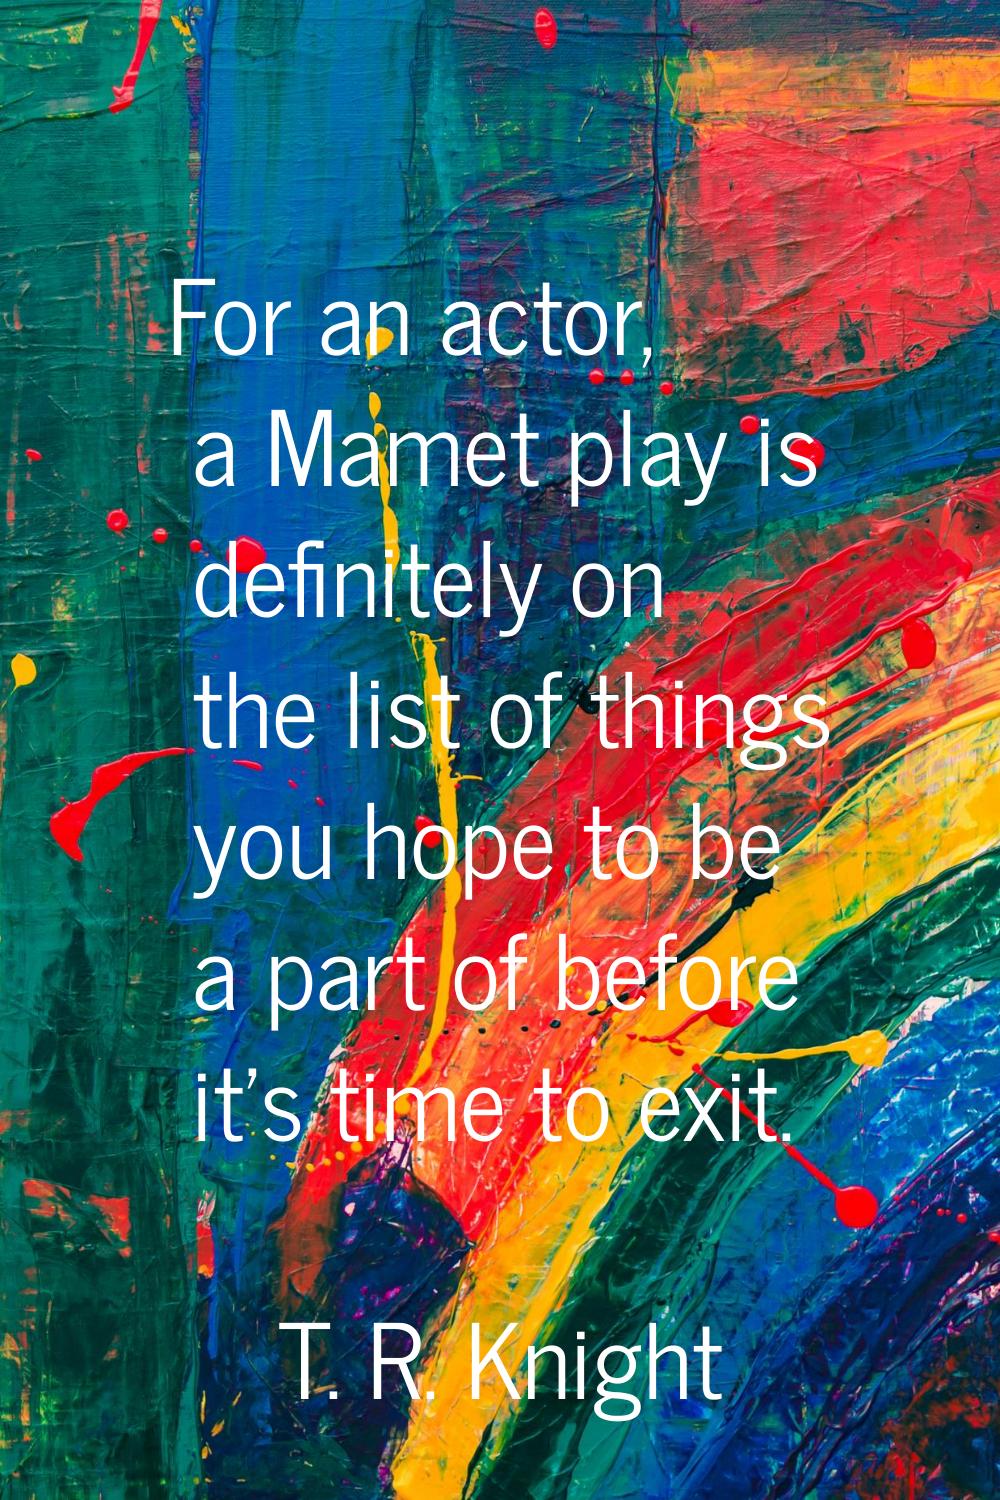 For an actor, a Mamet play is definitely on the list of things you hope to be a part of before it's